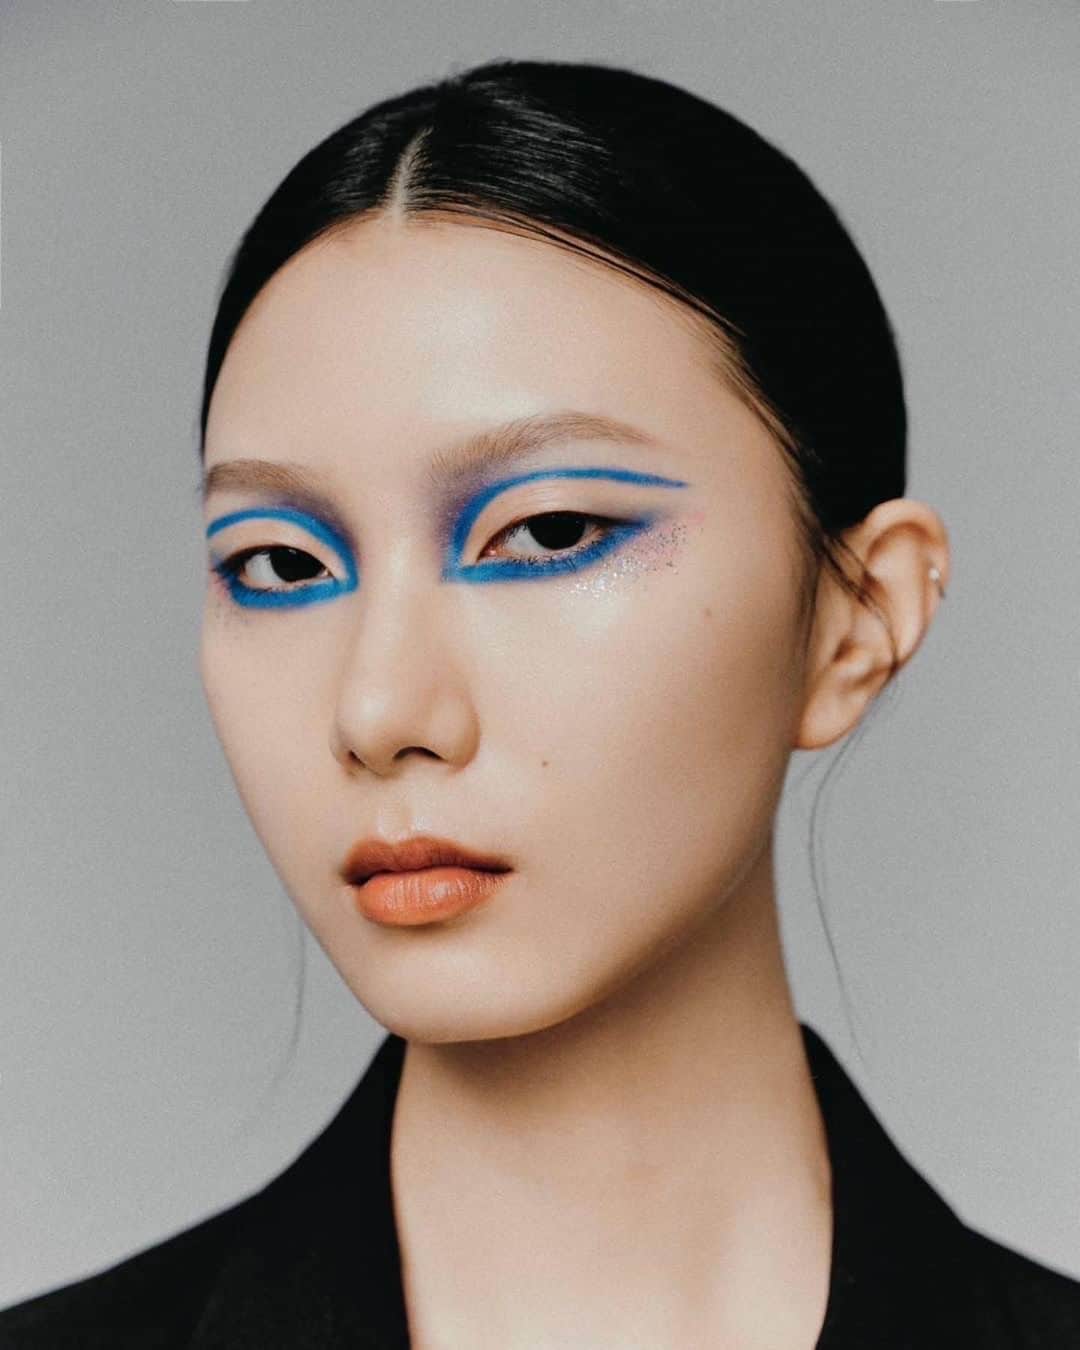 MAKE UP FOR EVER OFFICIALのインスタグラム：「Create and elevate your best make up looks that will last FOR EVER.   Makeup artists @nash_chen and @kc_mgmt created this artistic look using our #AquaResist Graphic Pen, Artist Color Shadow in the shades M214 and M924 and #TheProfessionALL Mascara.  Makeup @nash_chen @kc_mgmt  Photo by @new78945  Model @y0cun @lsimgmt_official  Hair @hsinnnyennn   #MAKEUPFOREVER」